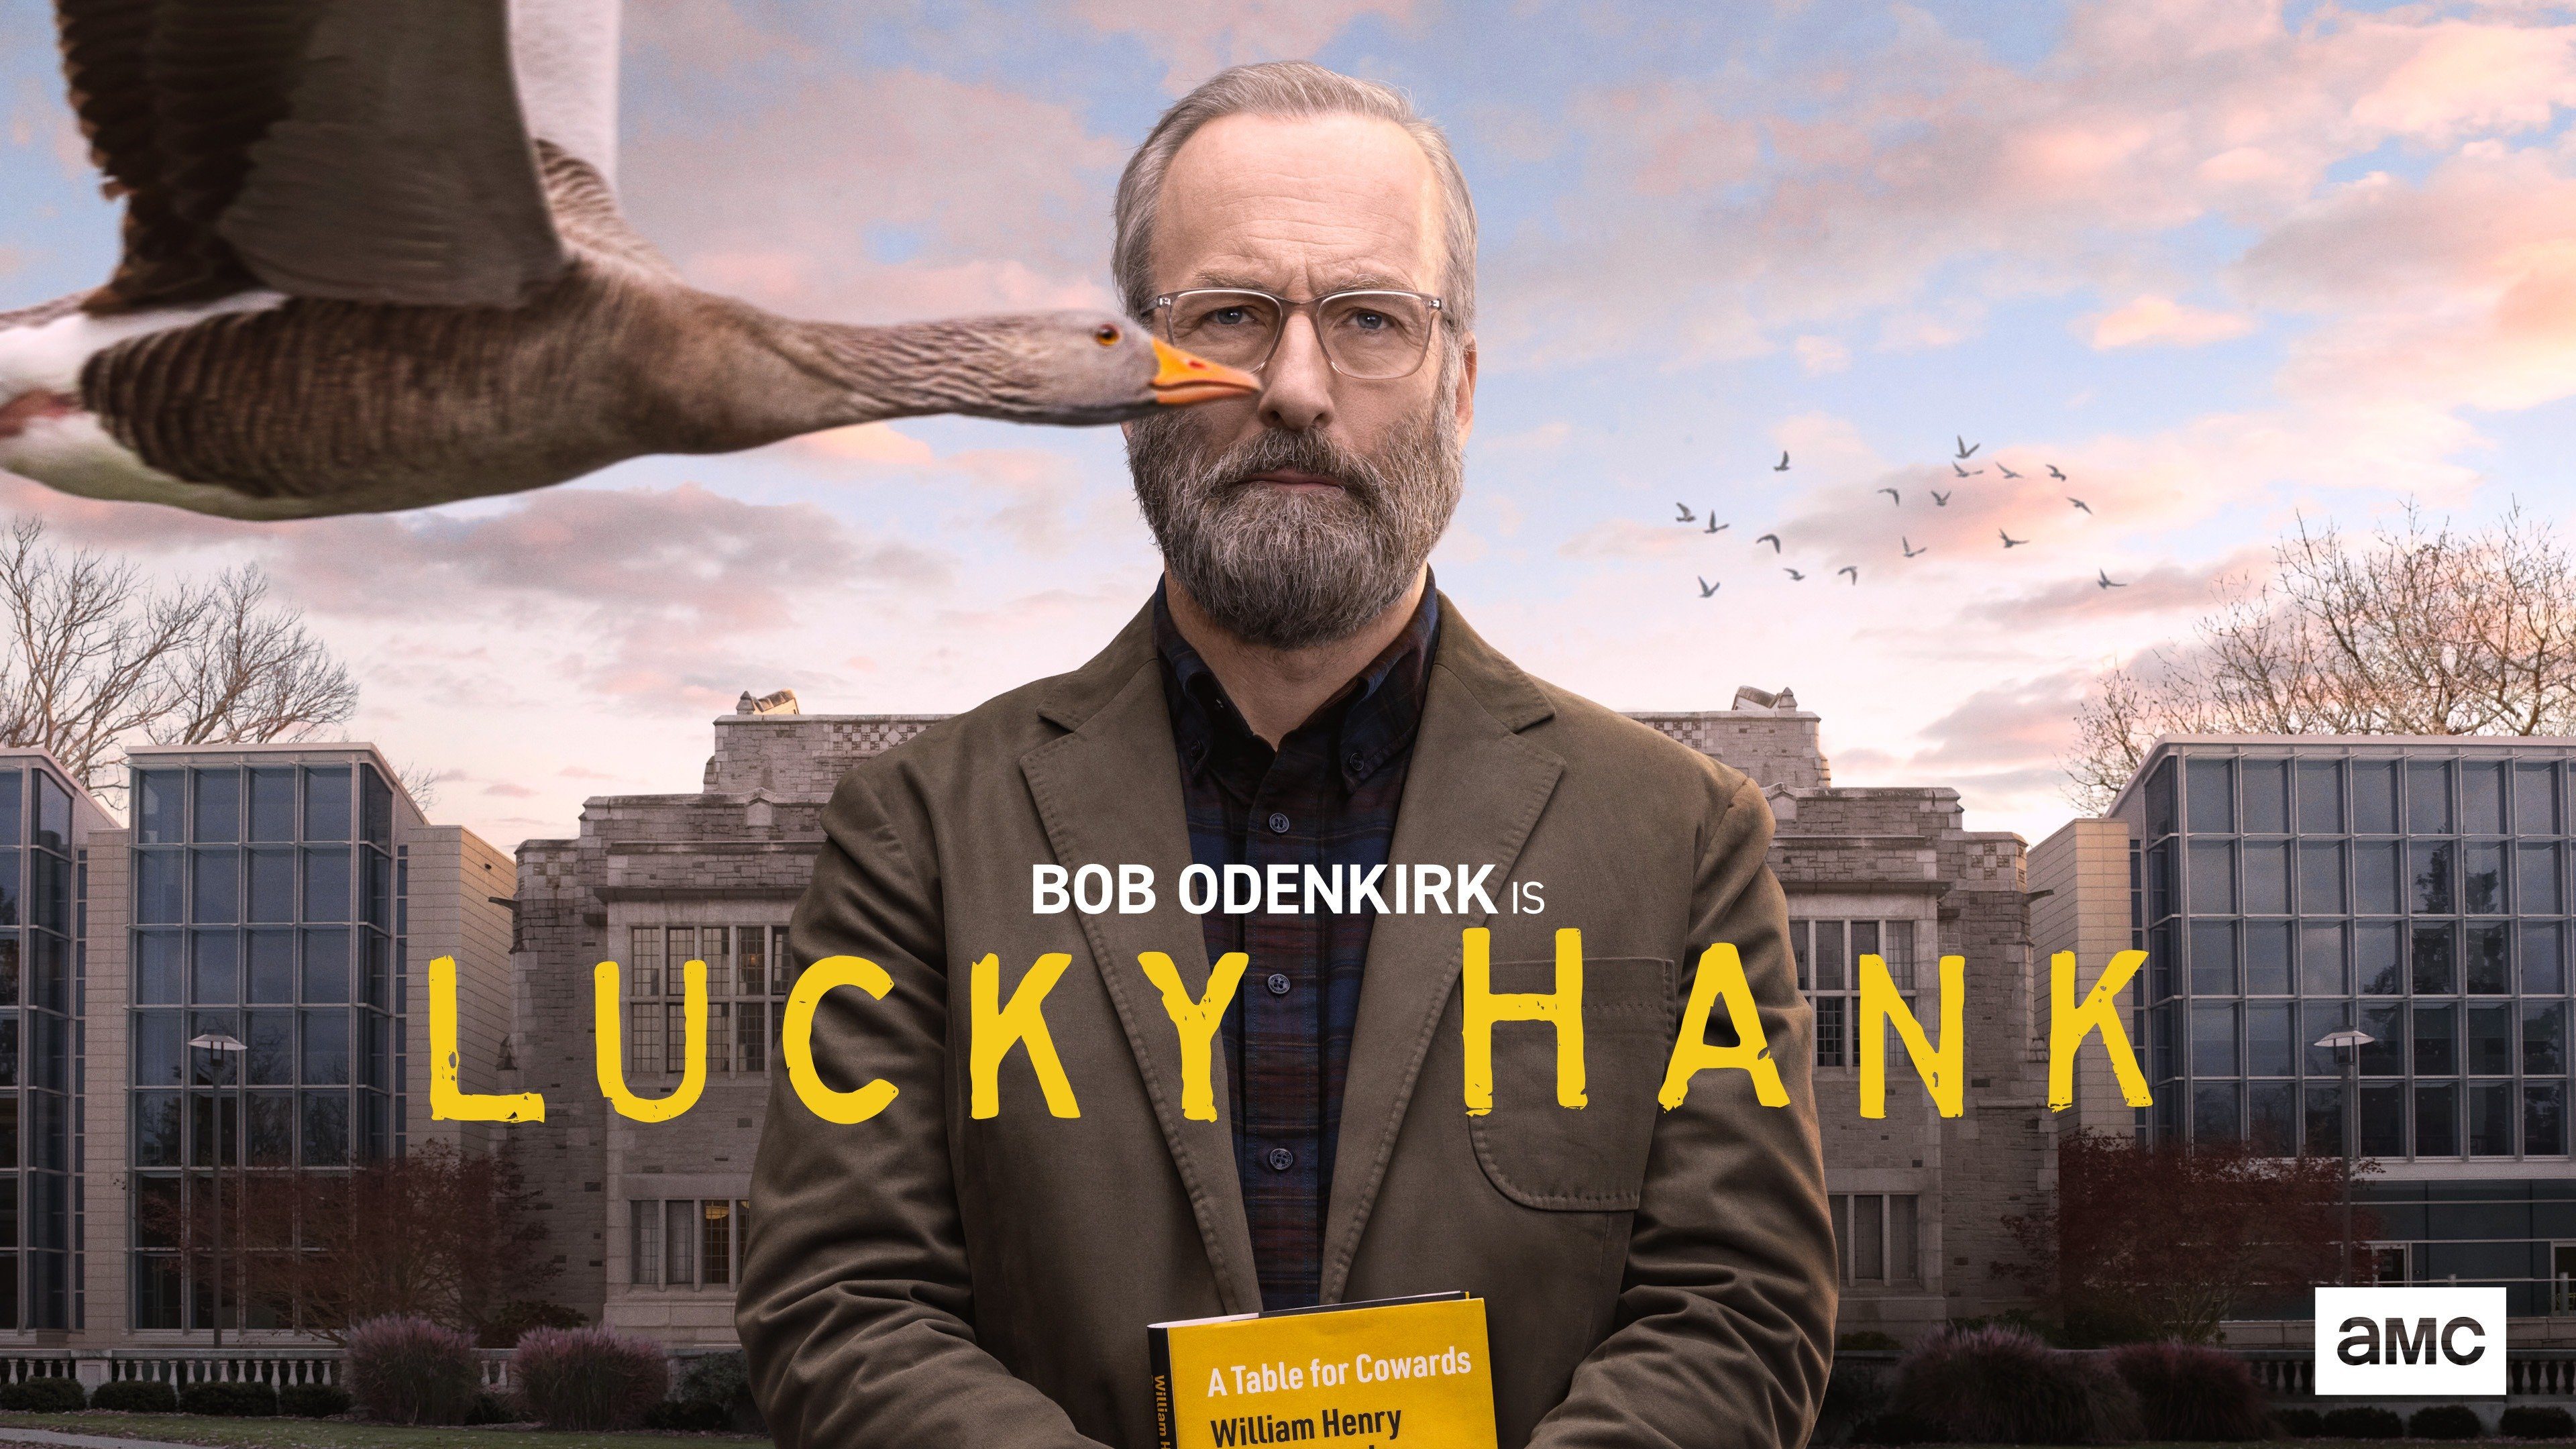 Comedy Series ‘Lucky Hank’ Starring ‘Better Call Saul’ Actor Bob Odenkirk to be Submitted for Emmys